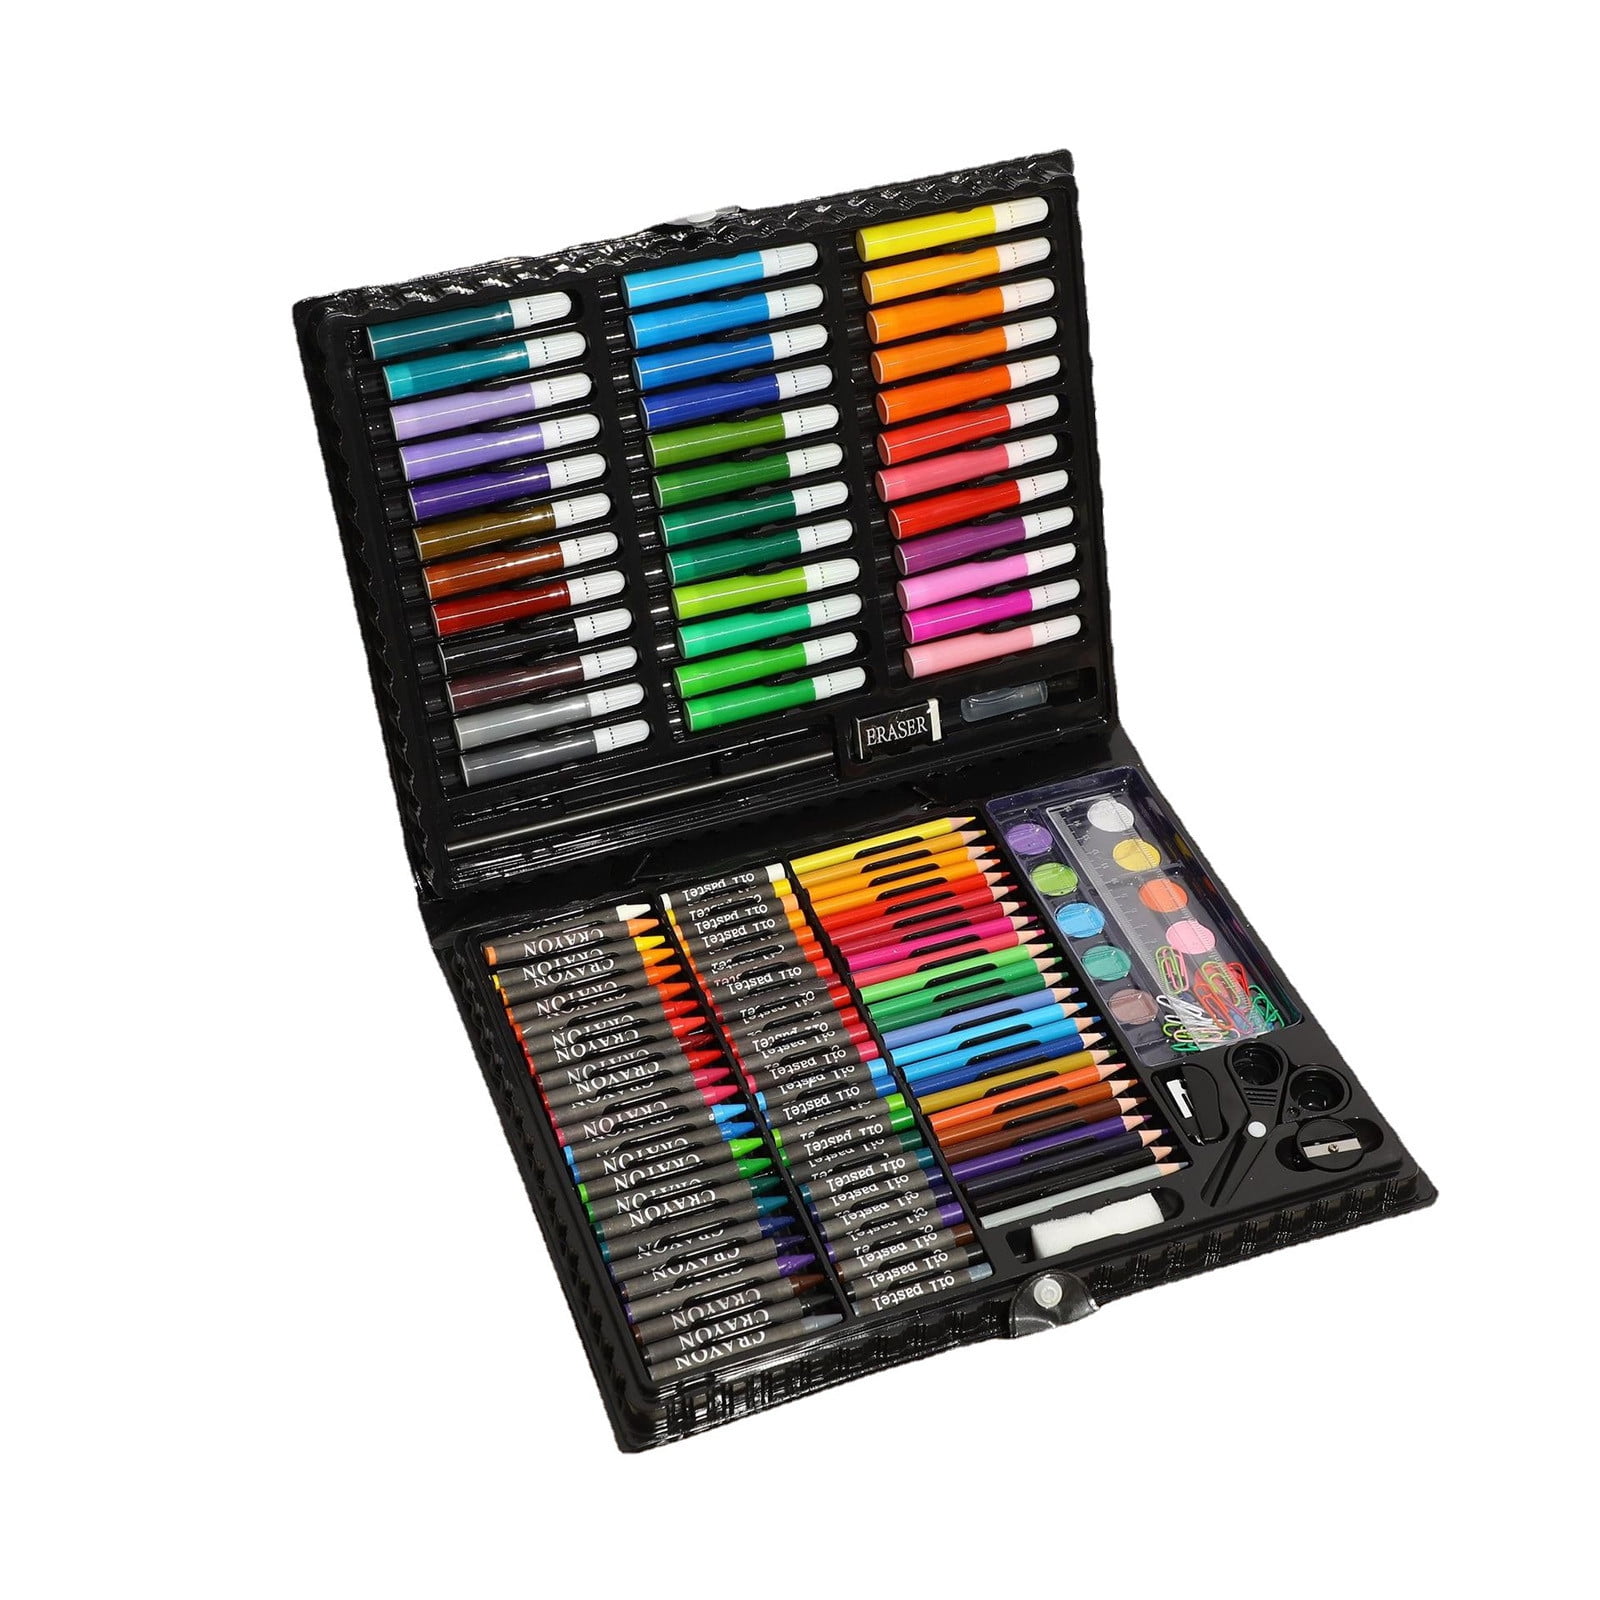 150-Piece Art Set Art Supplies for Drawing, Painting and More in A Plastic Case - Makes A Great Gift for Children and Adults